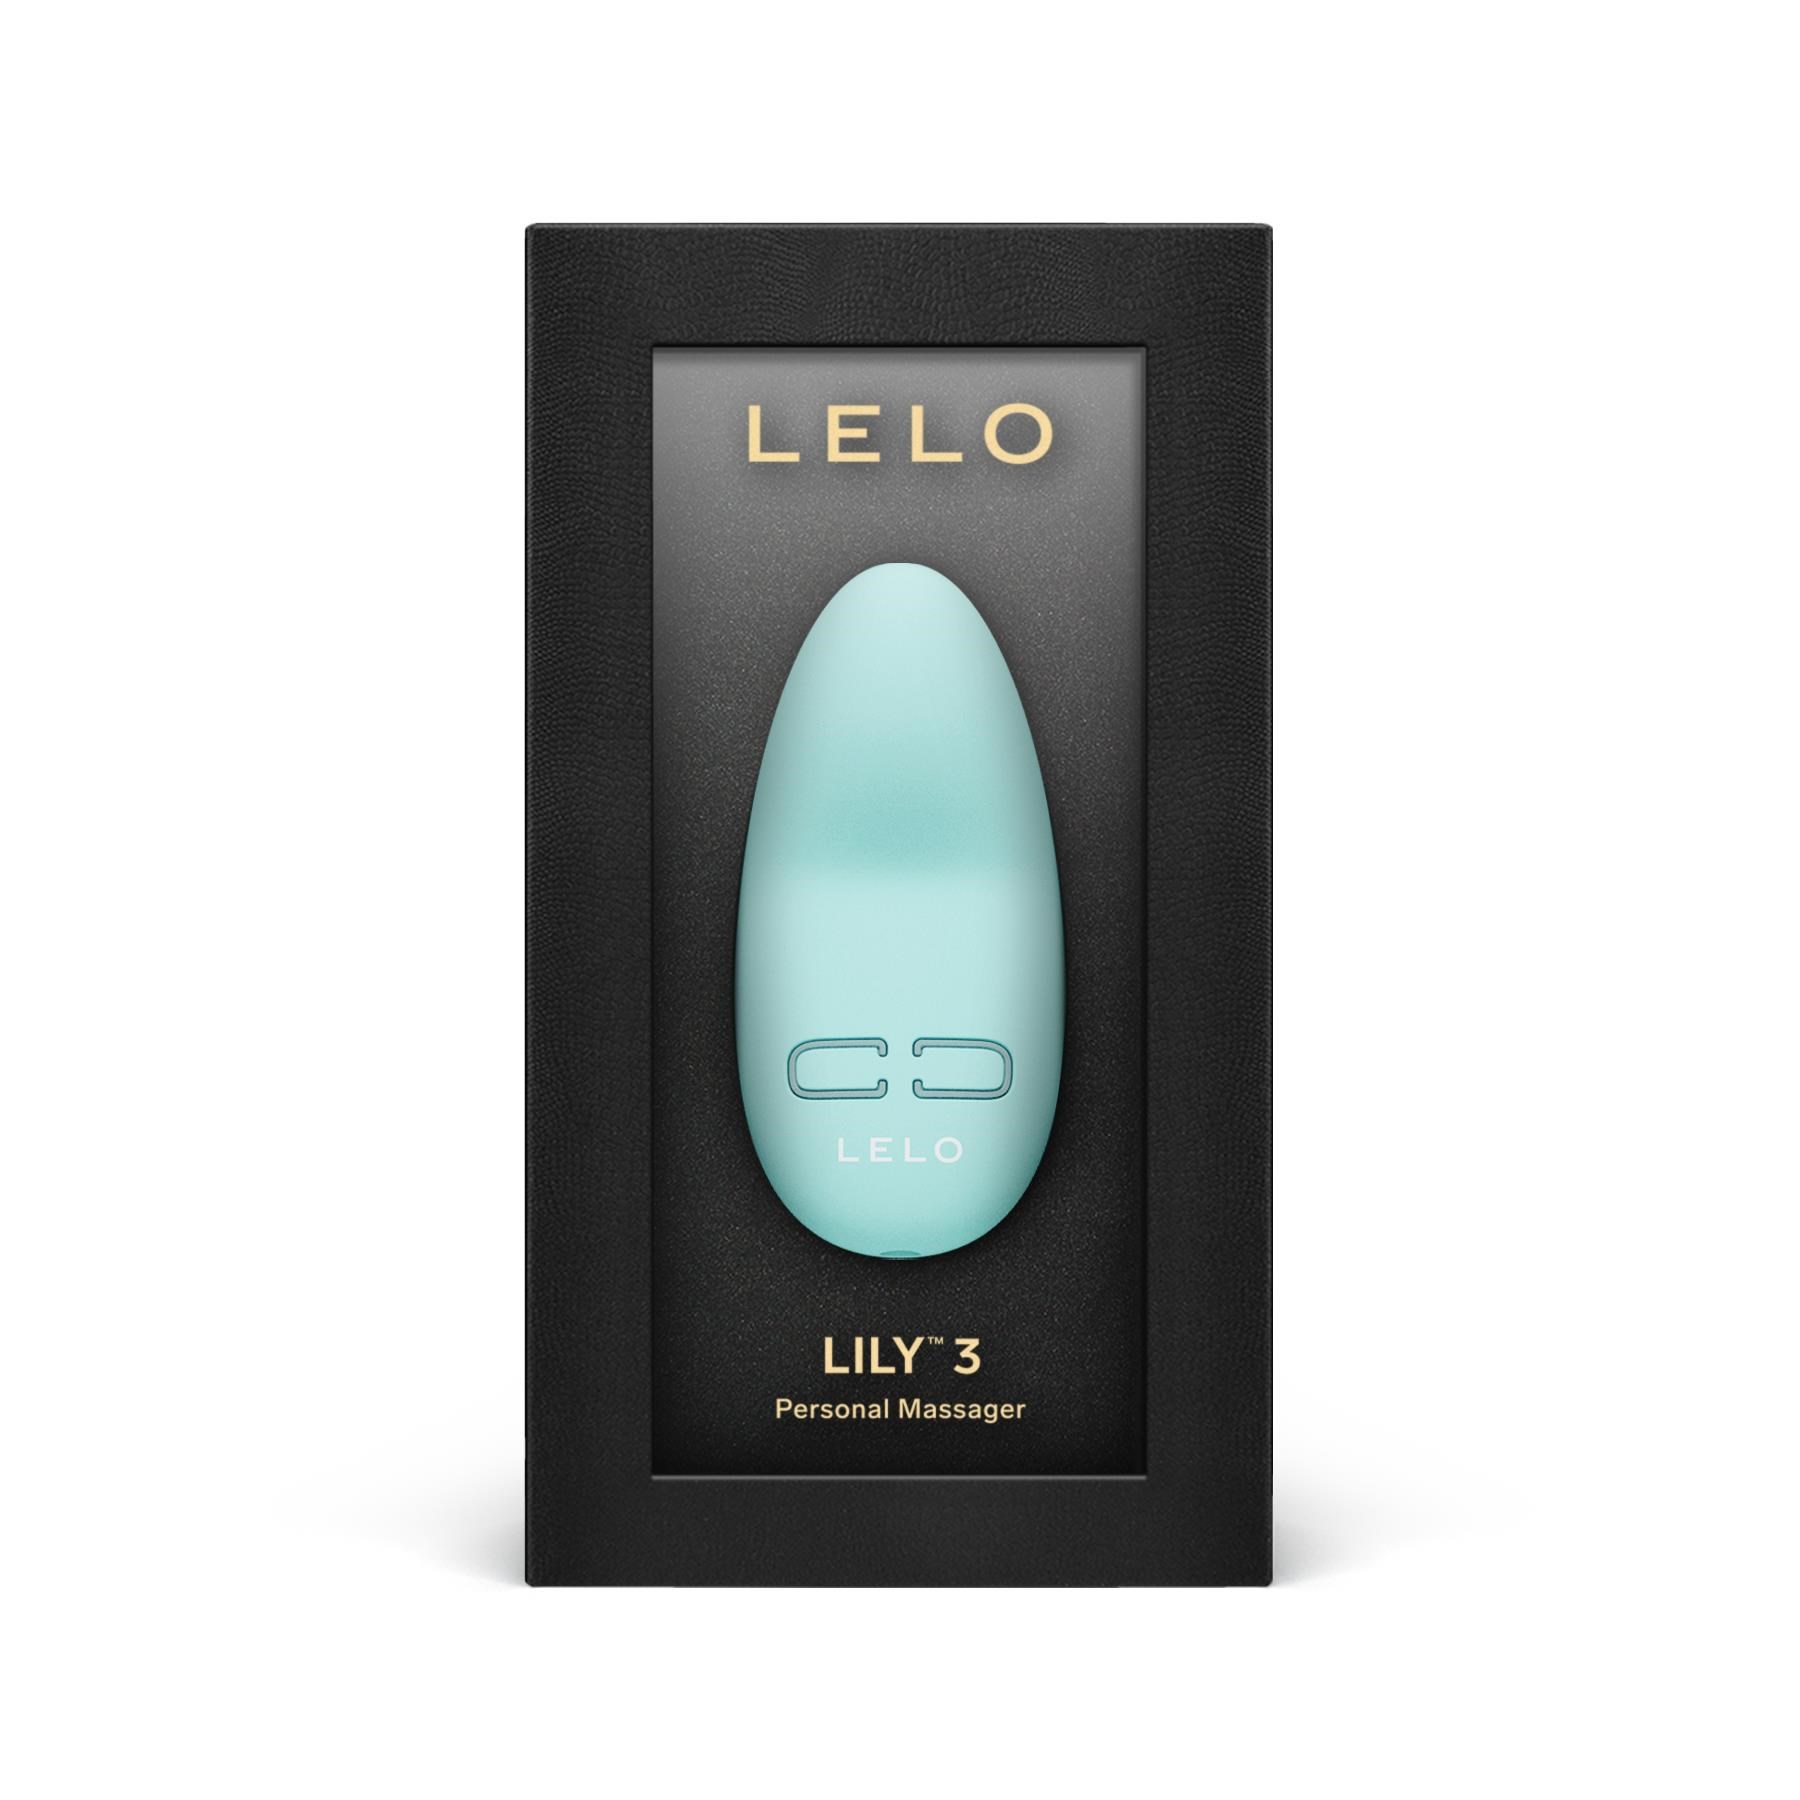 Lelo Lily 3 Personal Massager - packaging